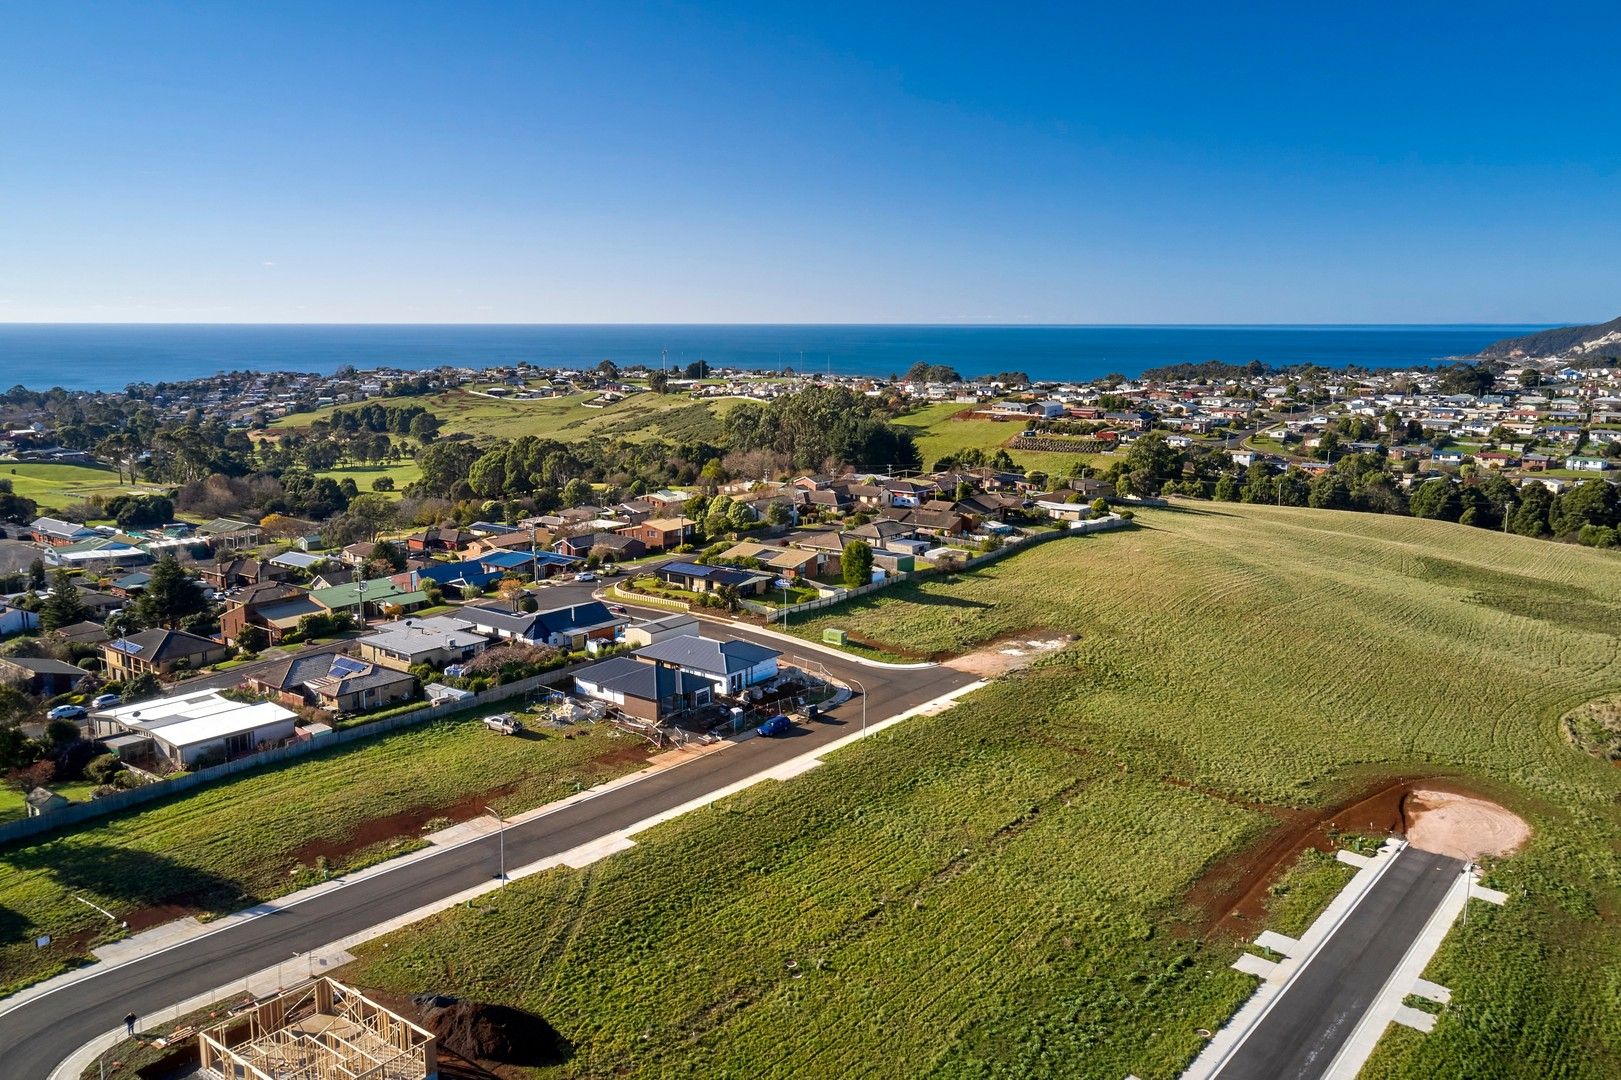 Lot 21 of 601 Loongana Avenue, Shorewell Park TAS 7320, Image 0